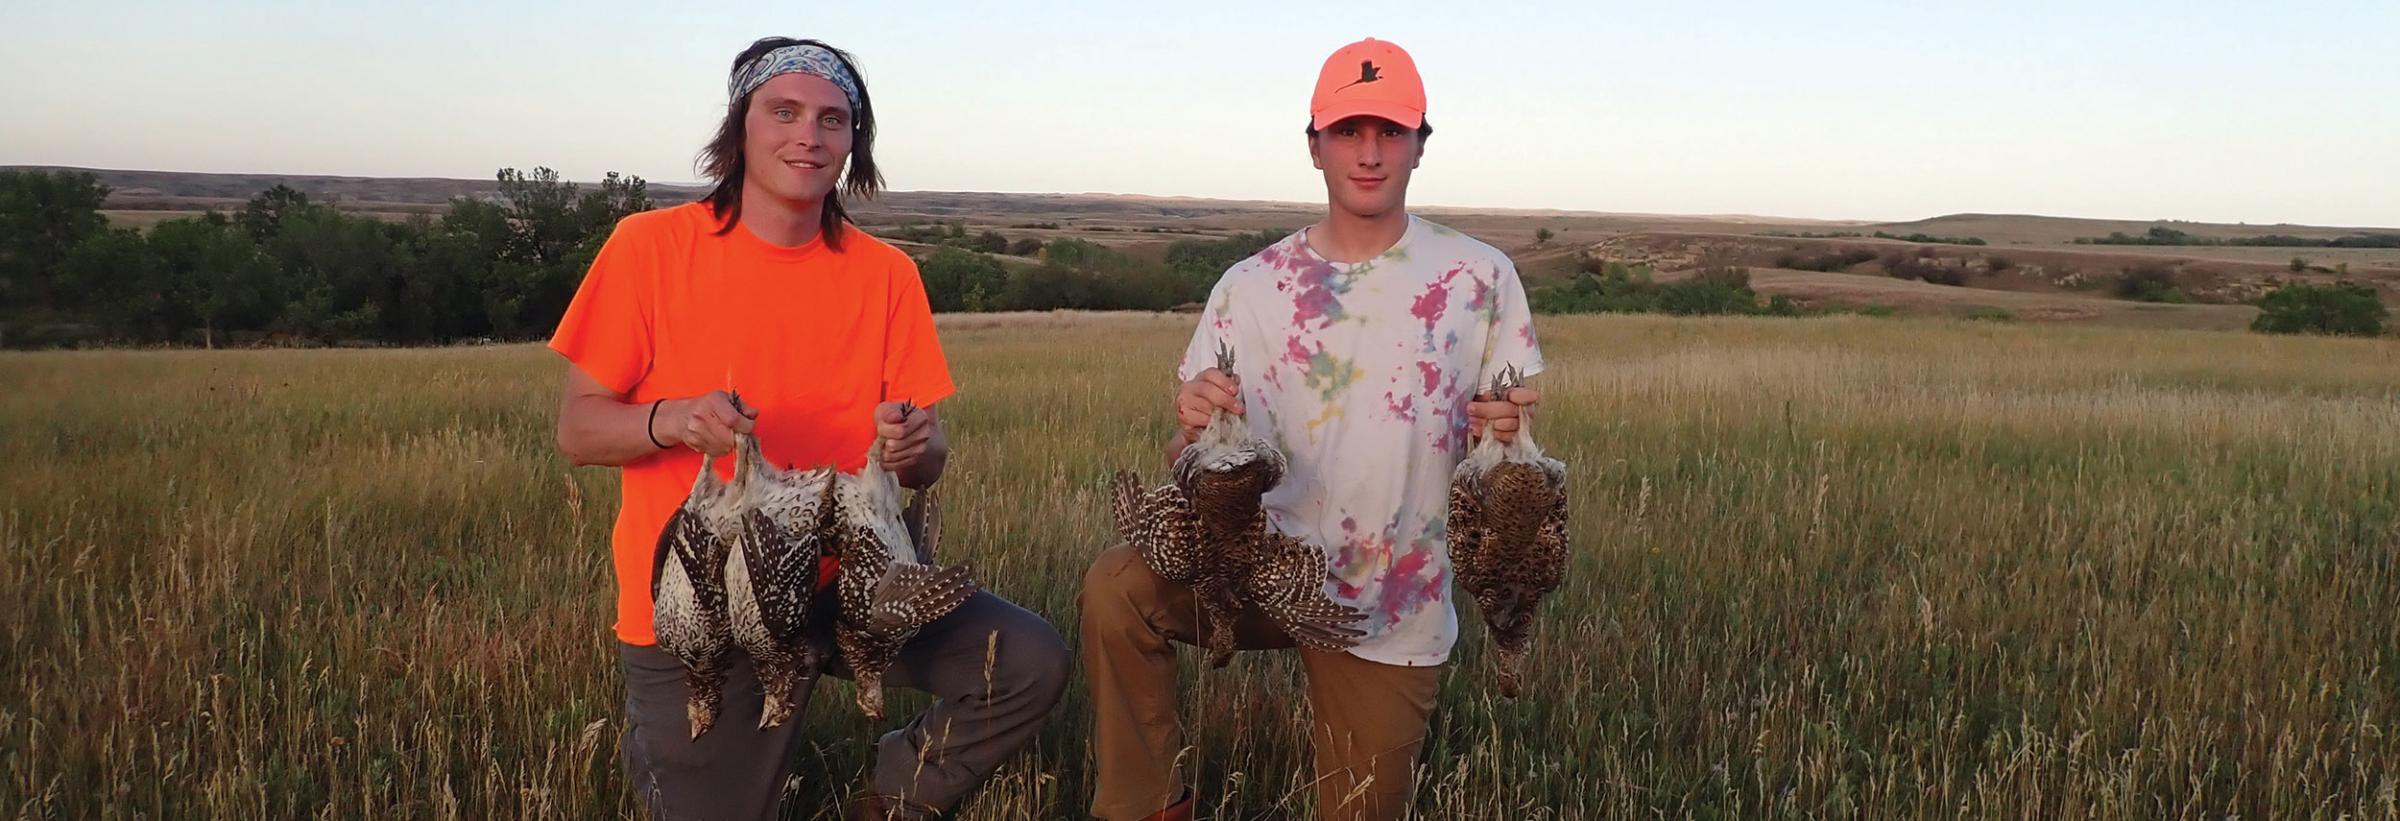 Hunters with harvested upland game birds